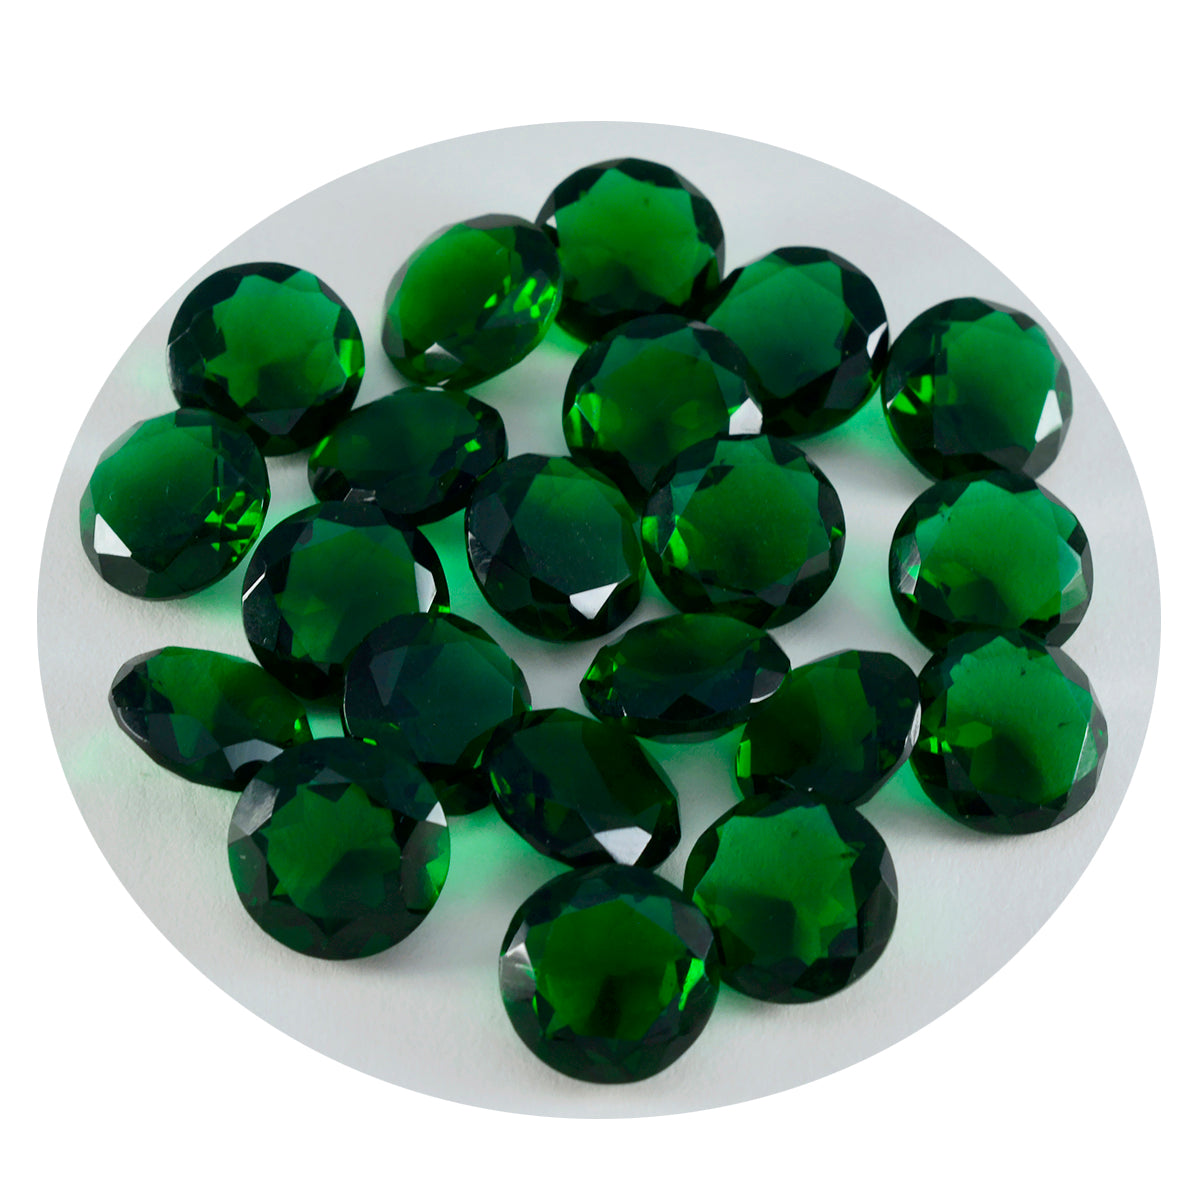 Riyogems 1PC Green Emerald CZ Faceted 8x8 mm Round Shape AAA Quality Loose Gem